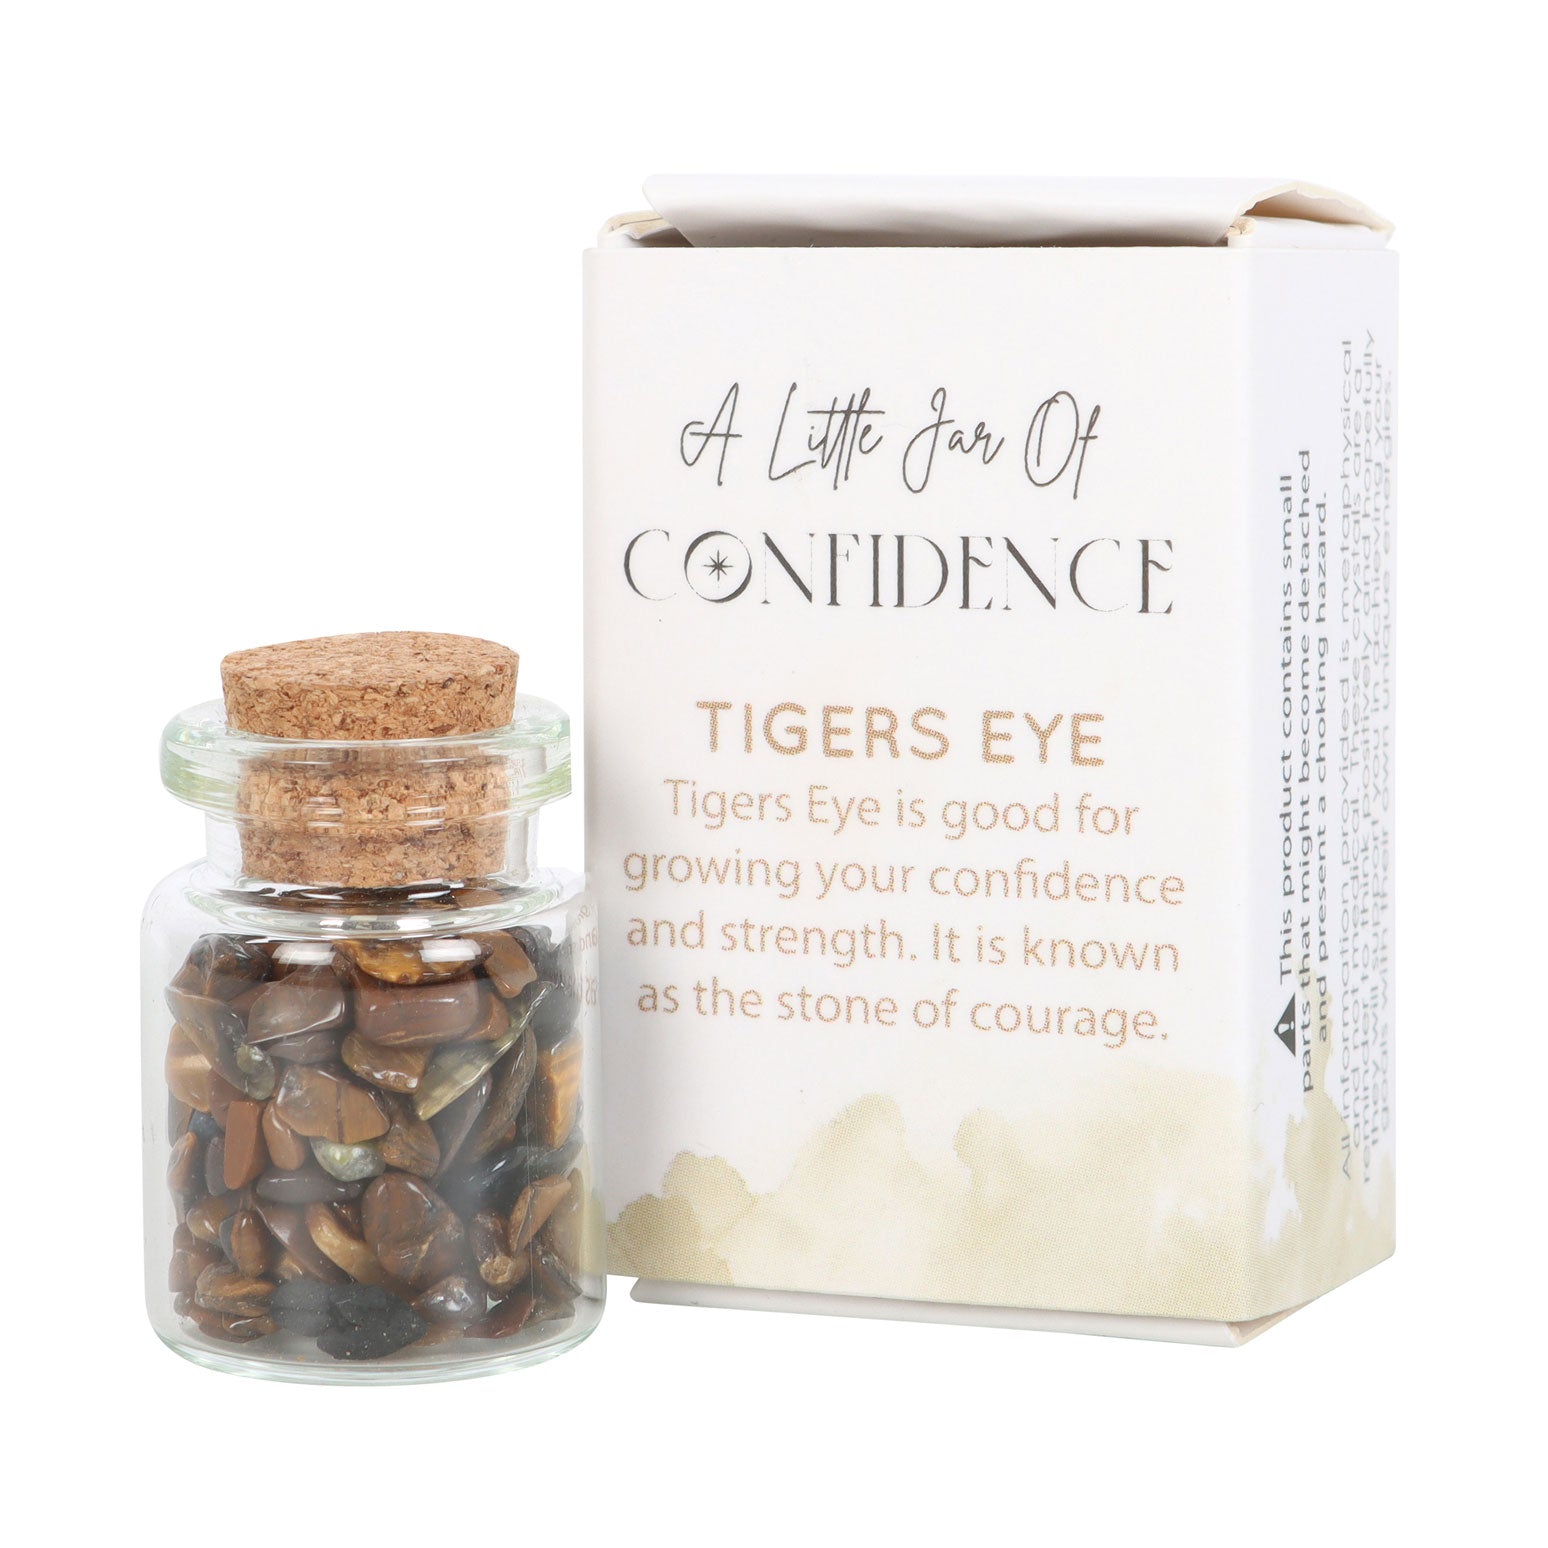 View Jar of Confidence Tigers Eye Crystal in a Matchbox information